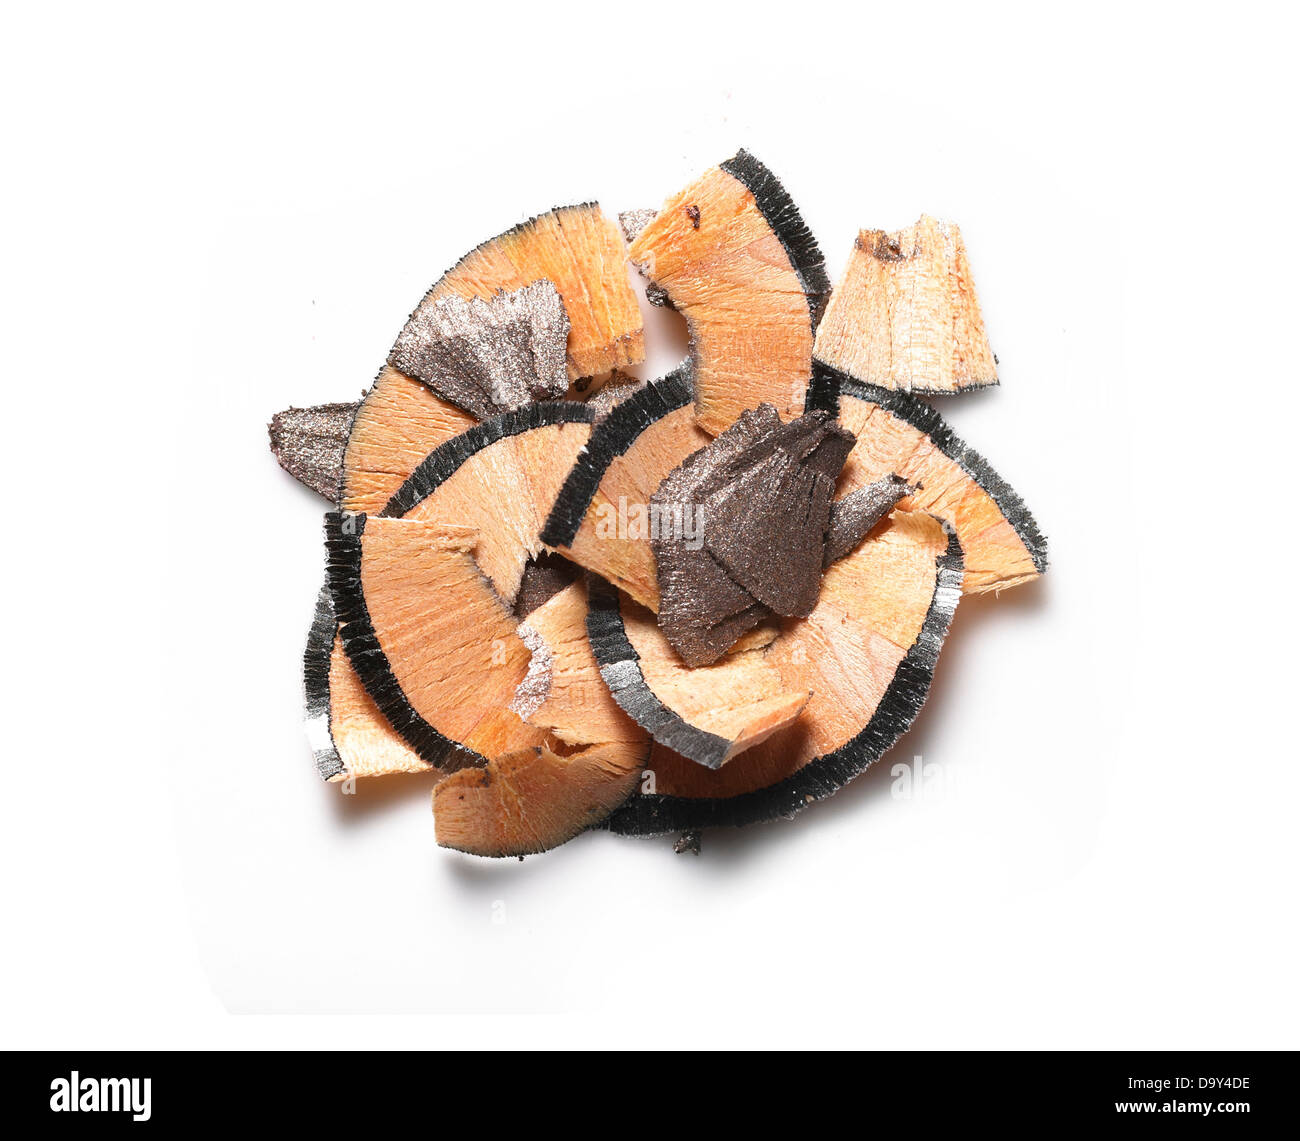 brown eyeliner pencil shavings cut out onto a white background Stock Photo